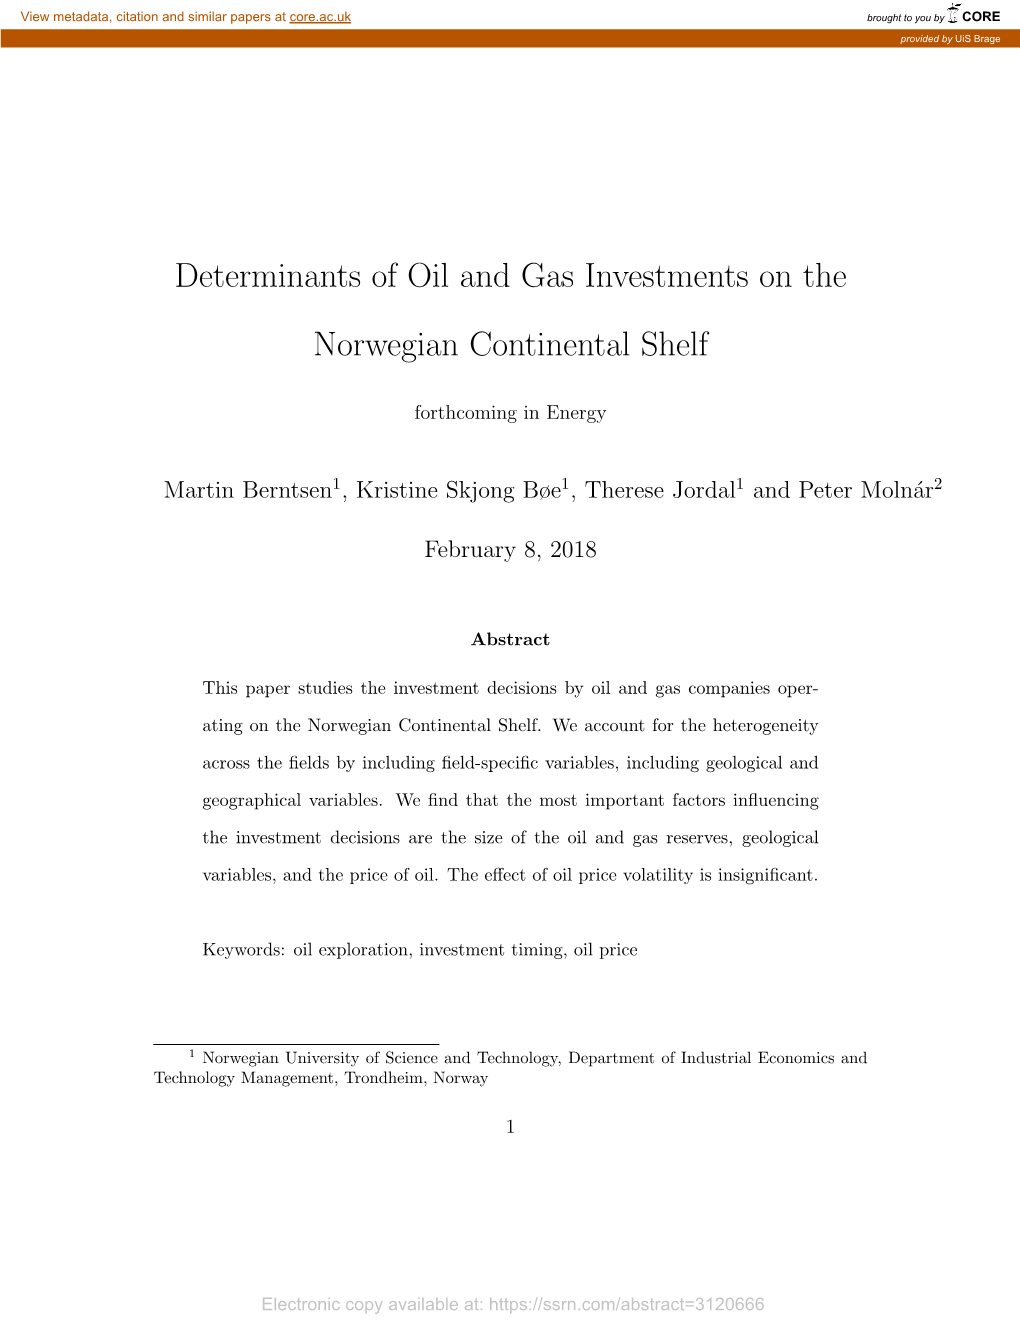 Determinants of Oil and Gas Investments on the Norwegian Continental Shelf